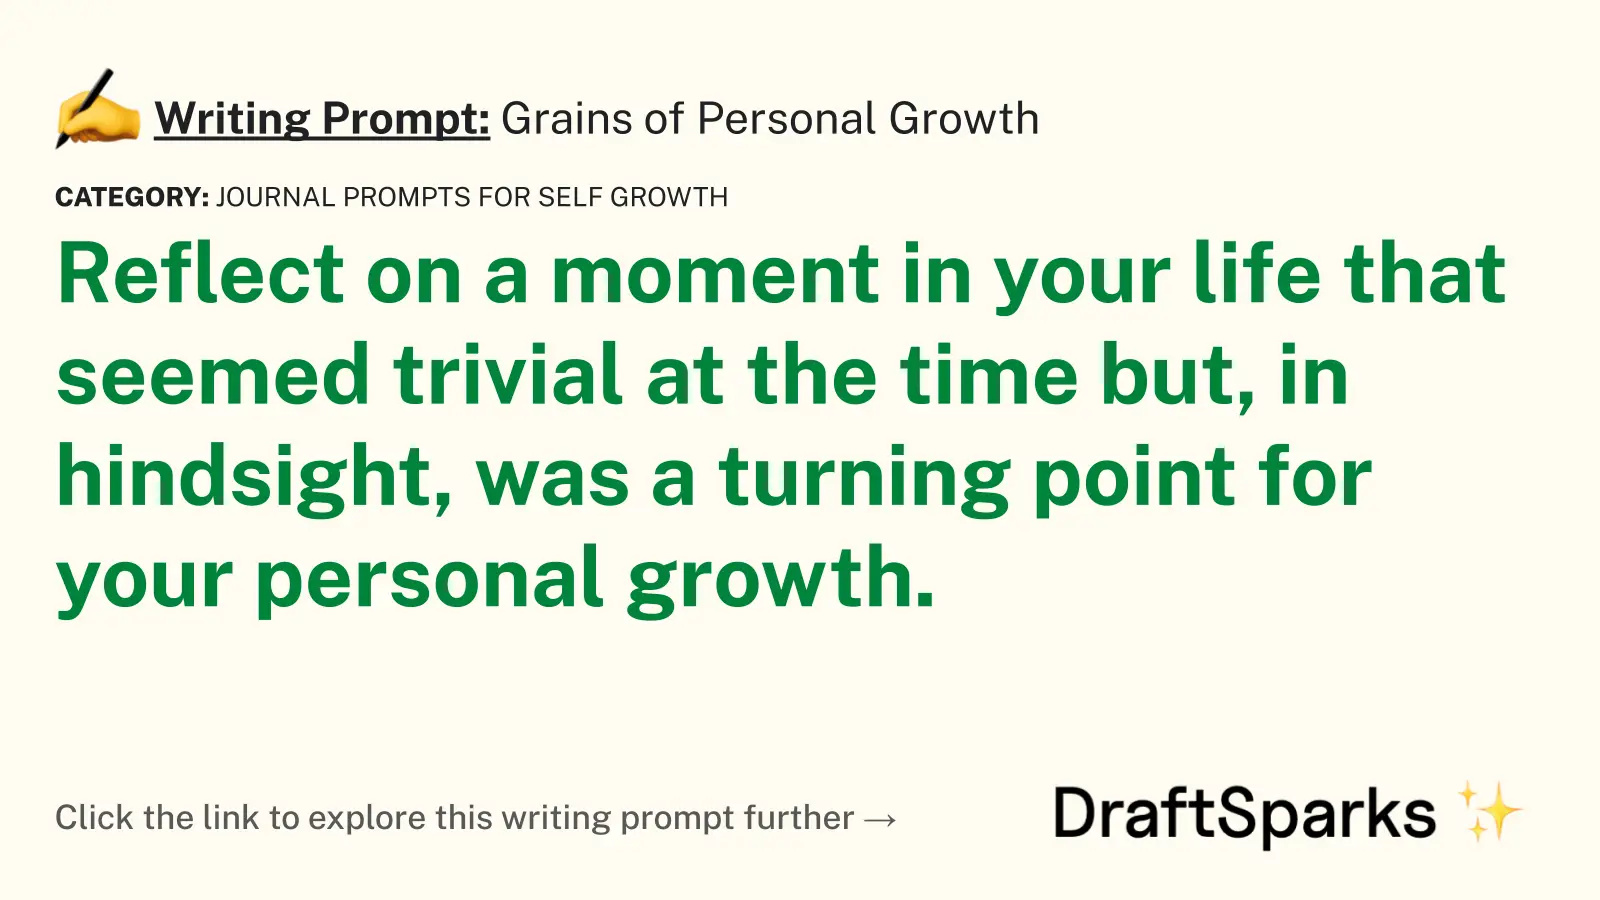 Grains of Personal Growth